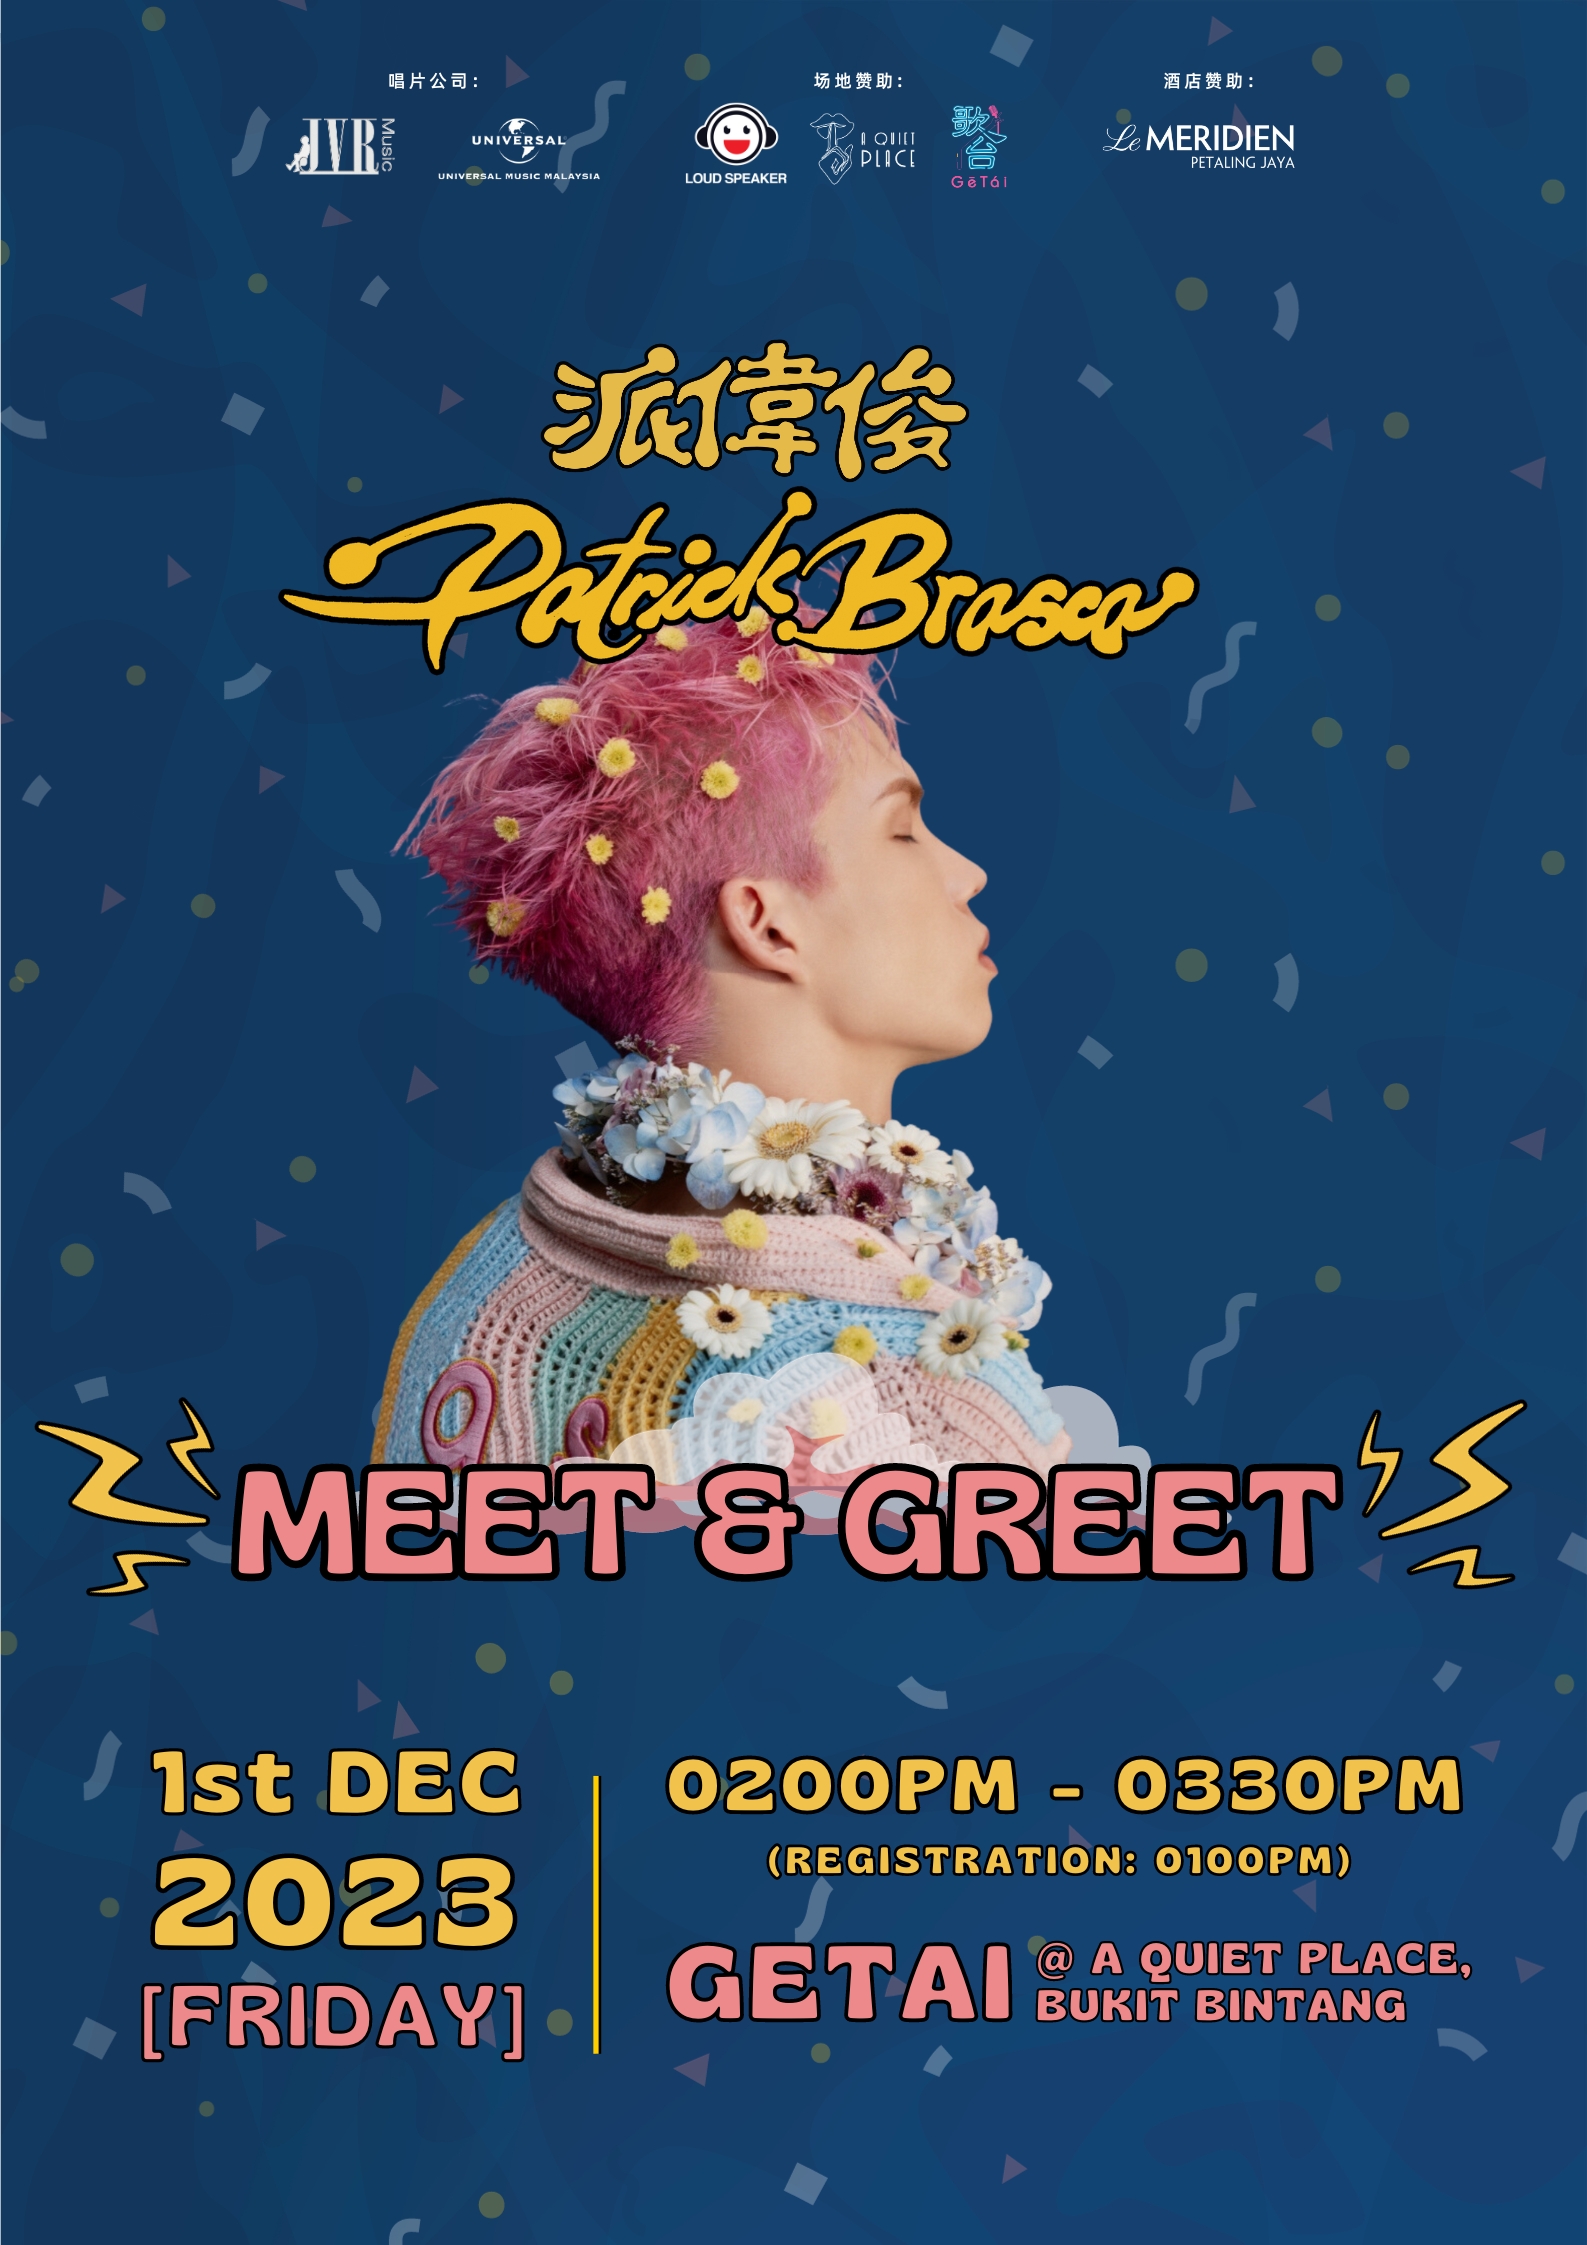 Mark your calendars it's time to meet your favourite star!